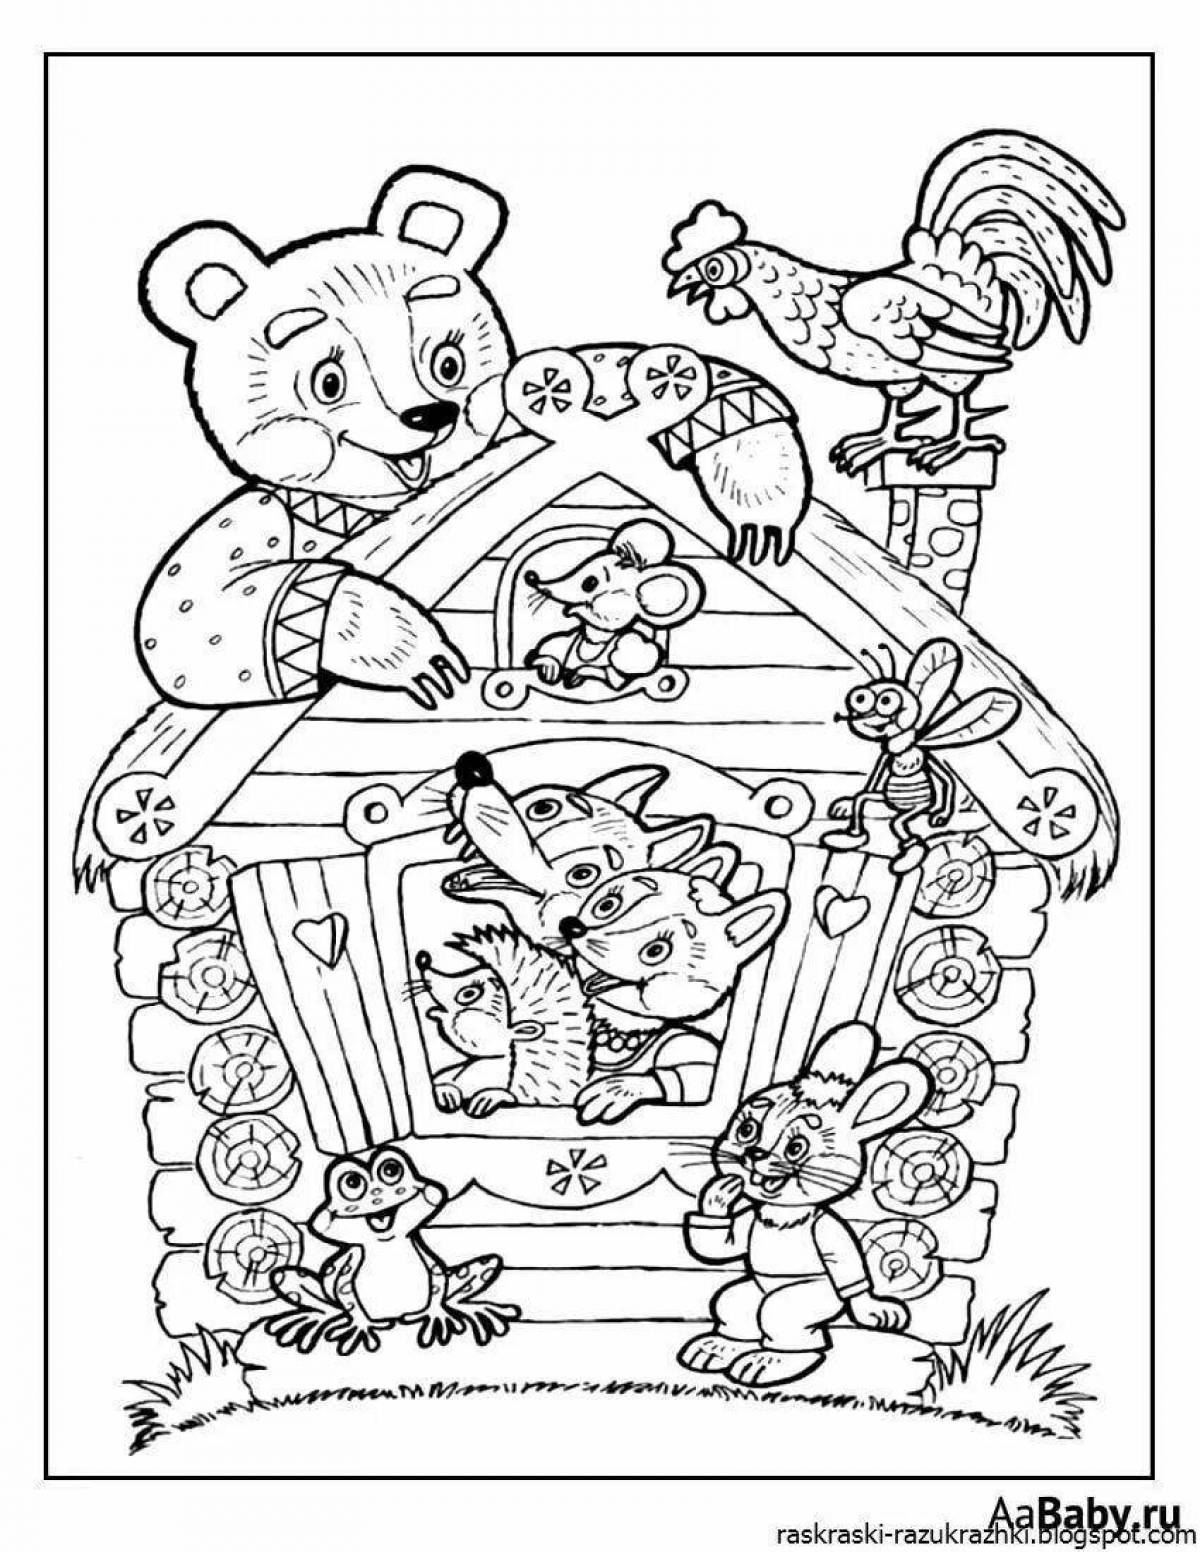 Charming house coloring book for children